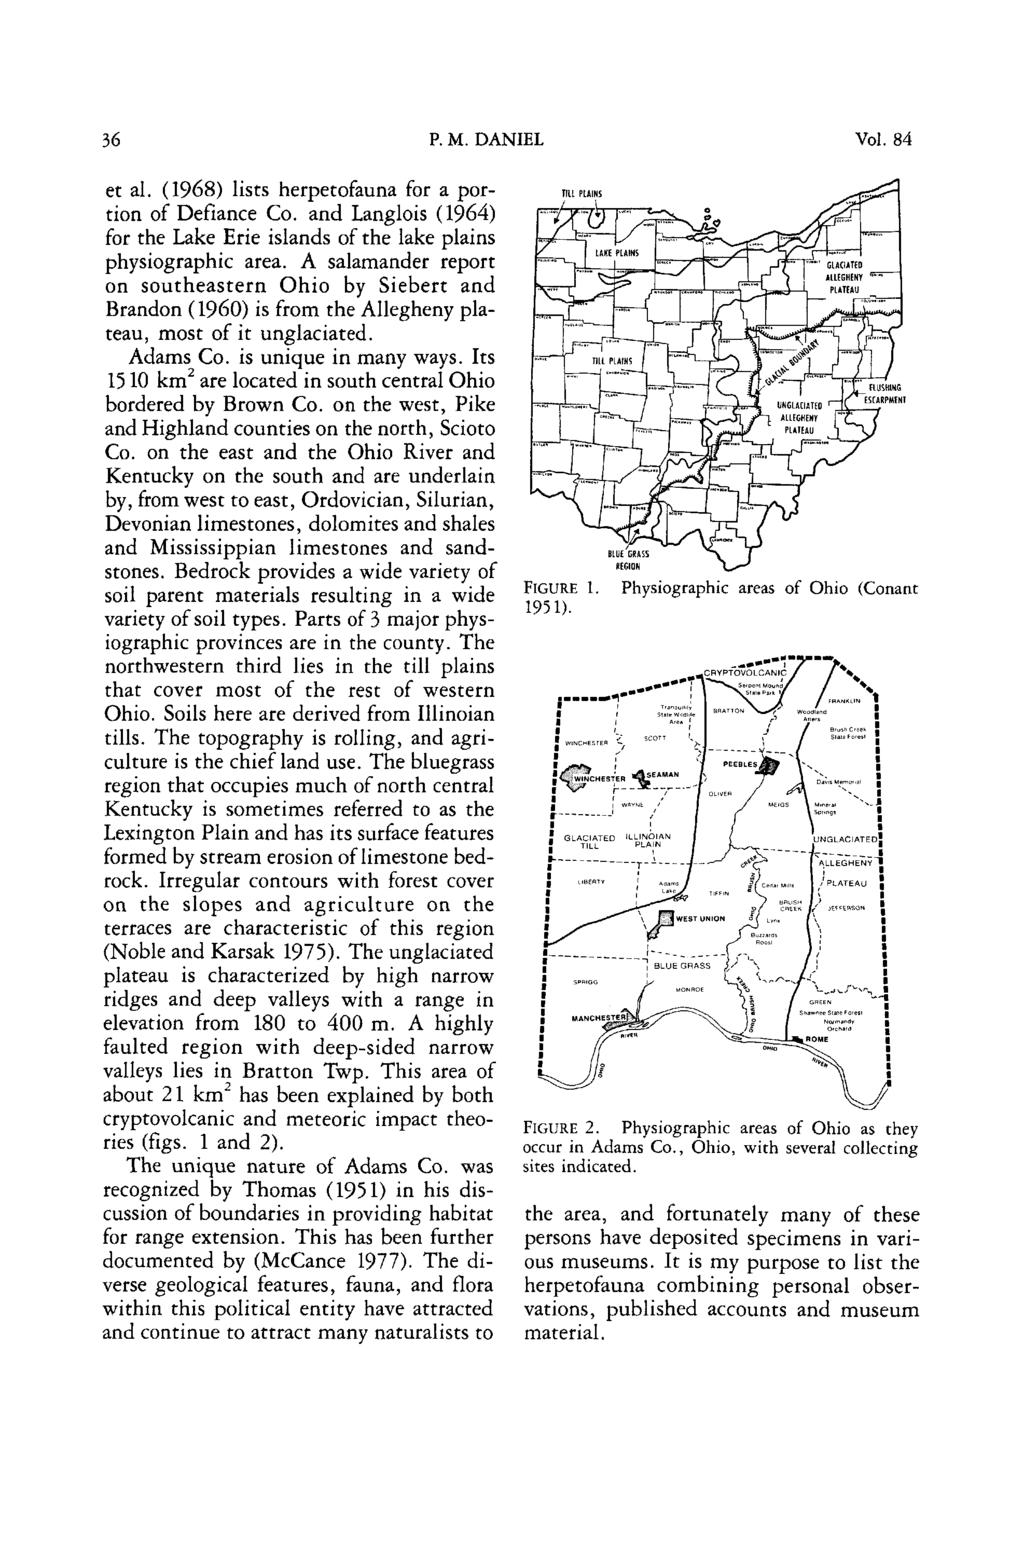 36 P. M. DANIEL Vol. 8 et al. (1968) lists herpetofauna for a portion of Defiance o. and Langlois (196) for the Lake Erie islands of the lake plains physiographic area.